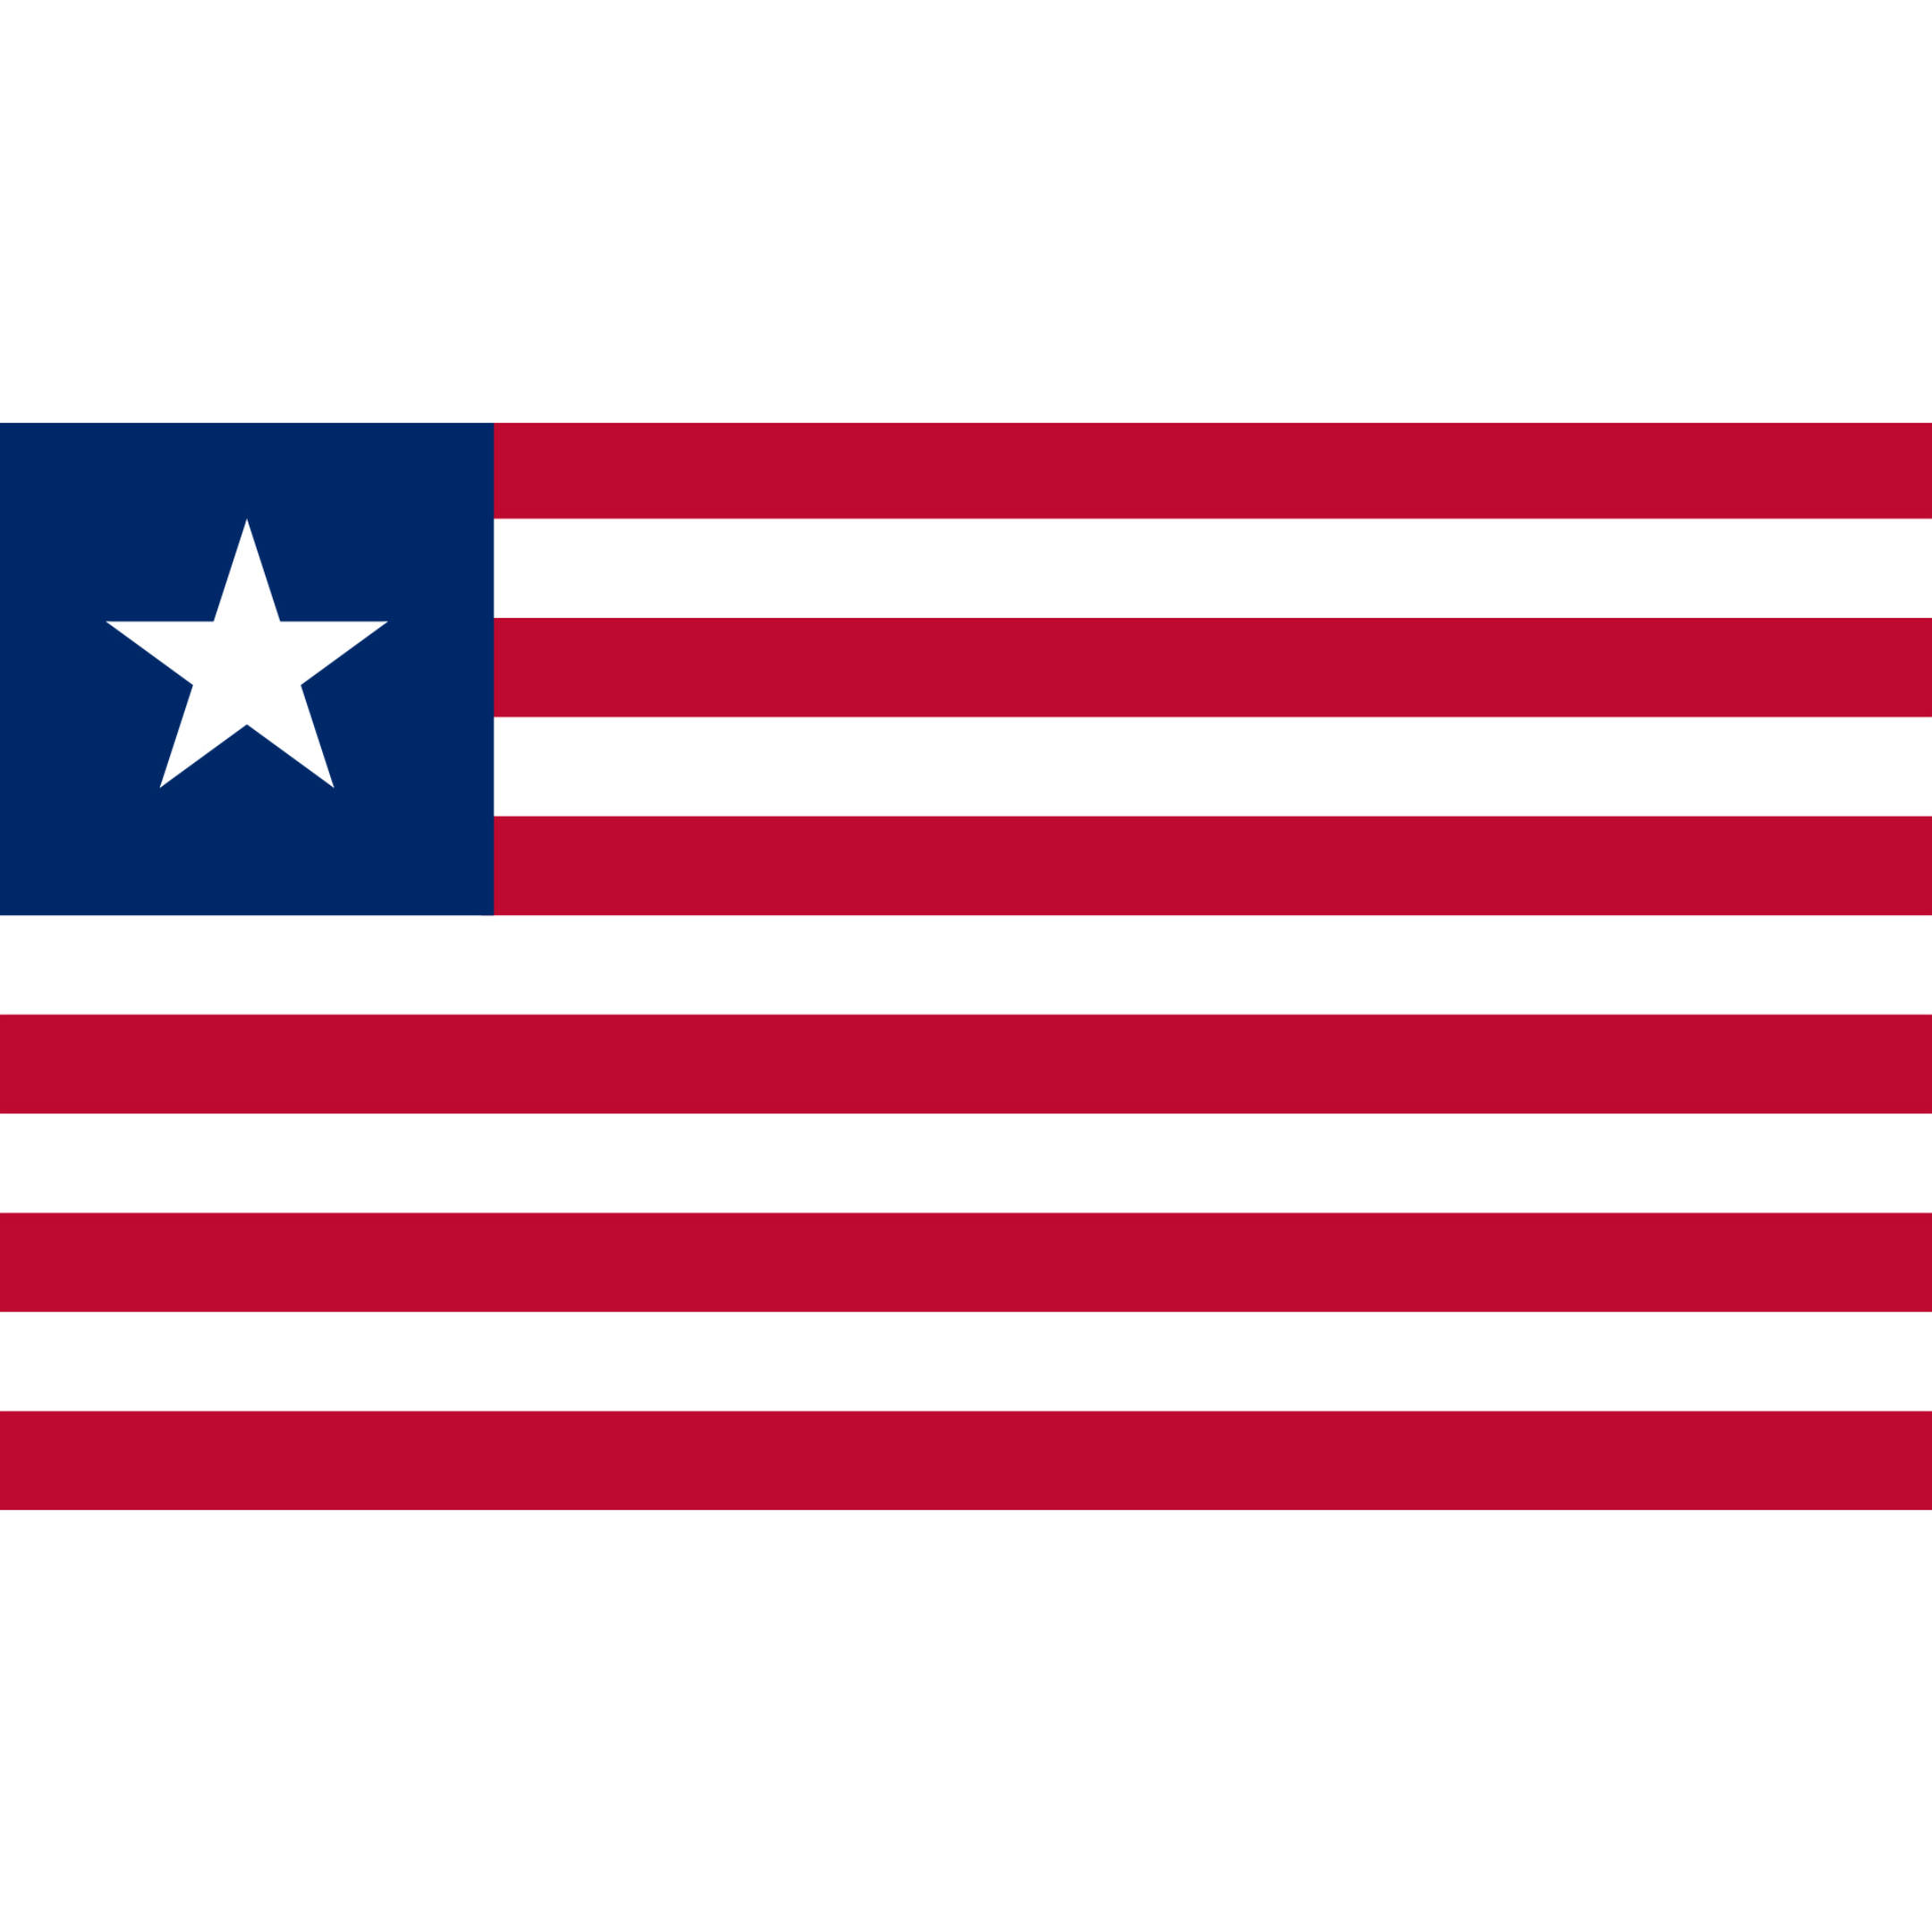 The Liberian flag consists of horizontal stripes (6 red and 5 white) and a blue rectangle containing a single white star. 